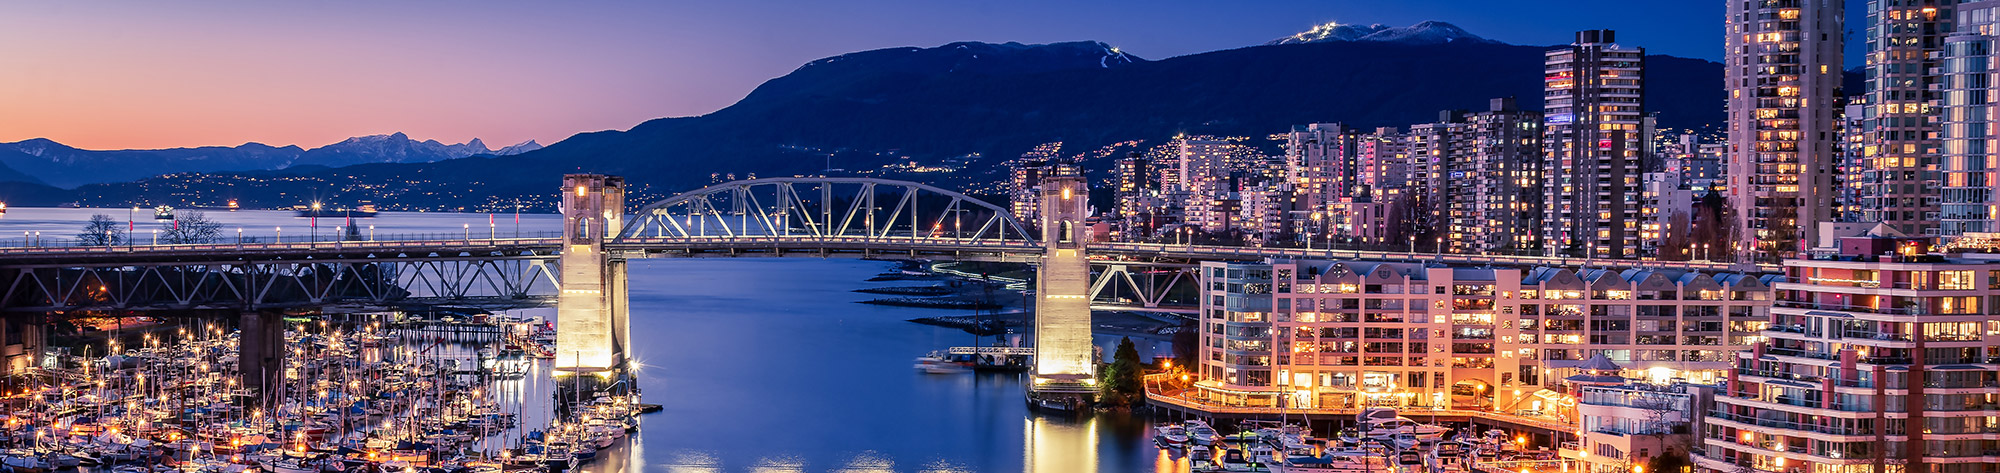 View of Vancouver, British Columbia at night, from Granville Bridge